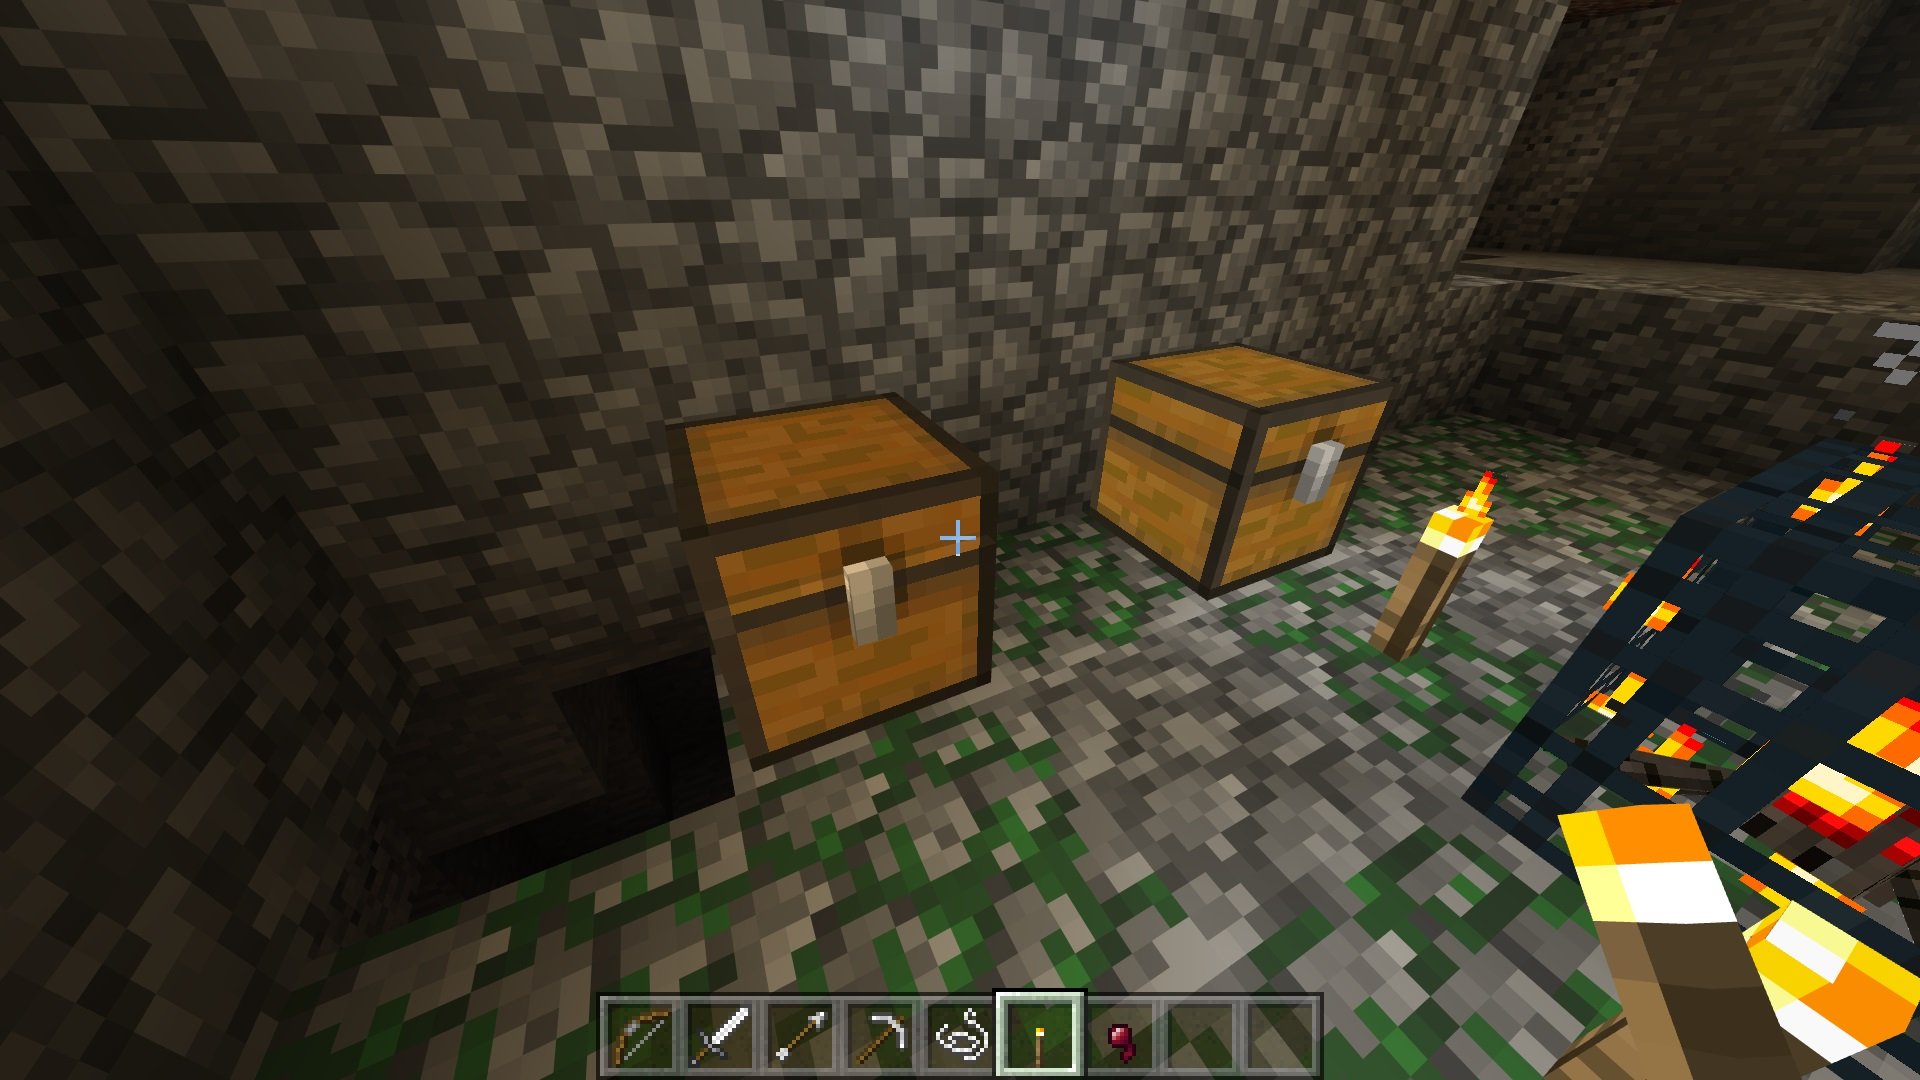 Dungeon chests